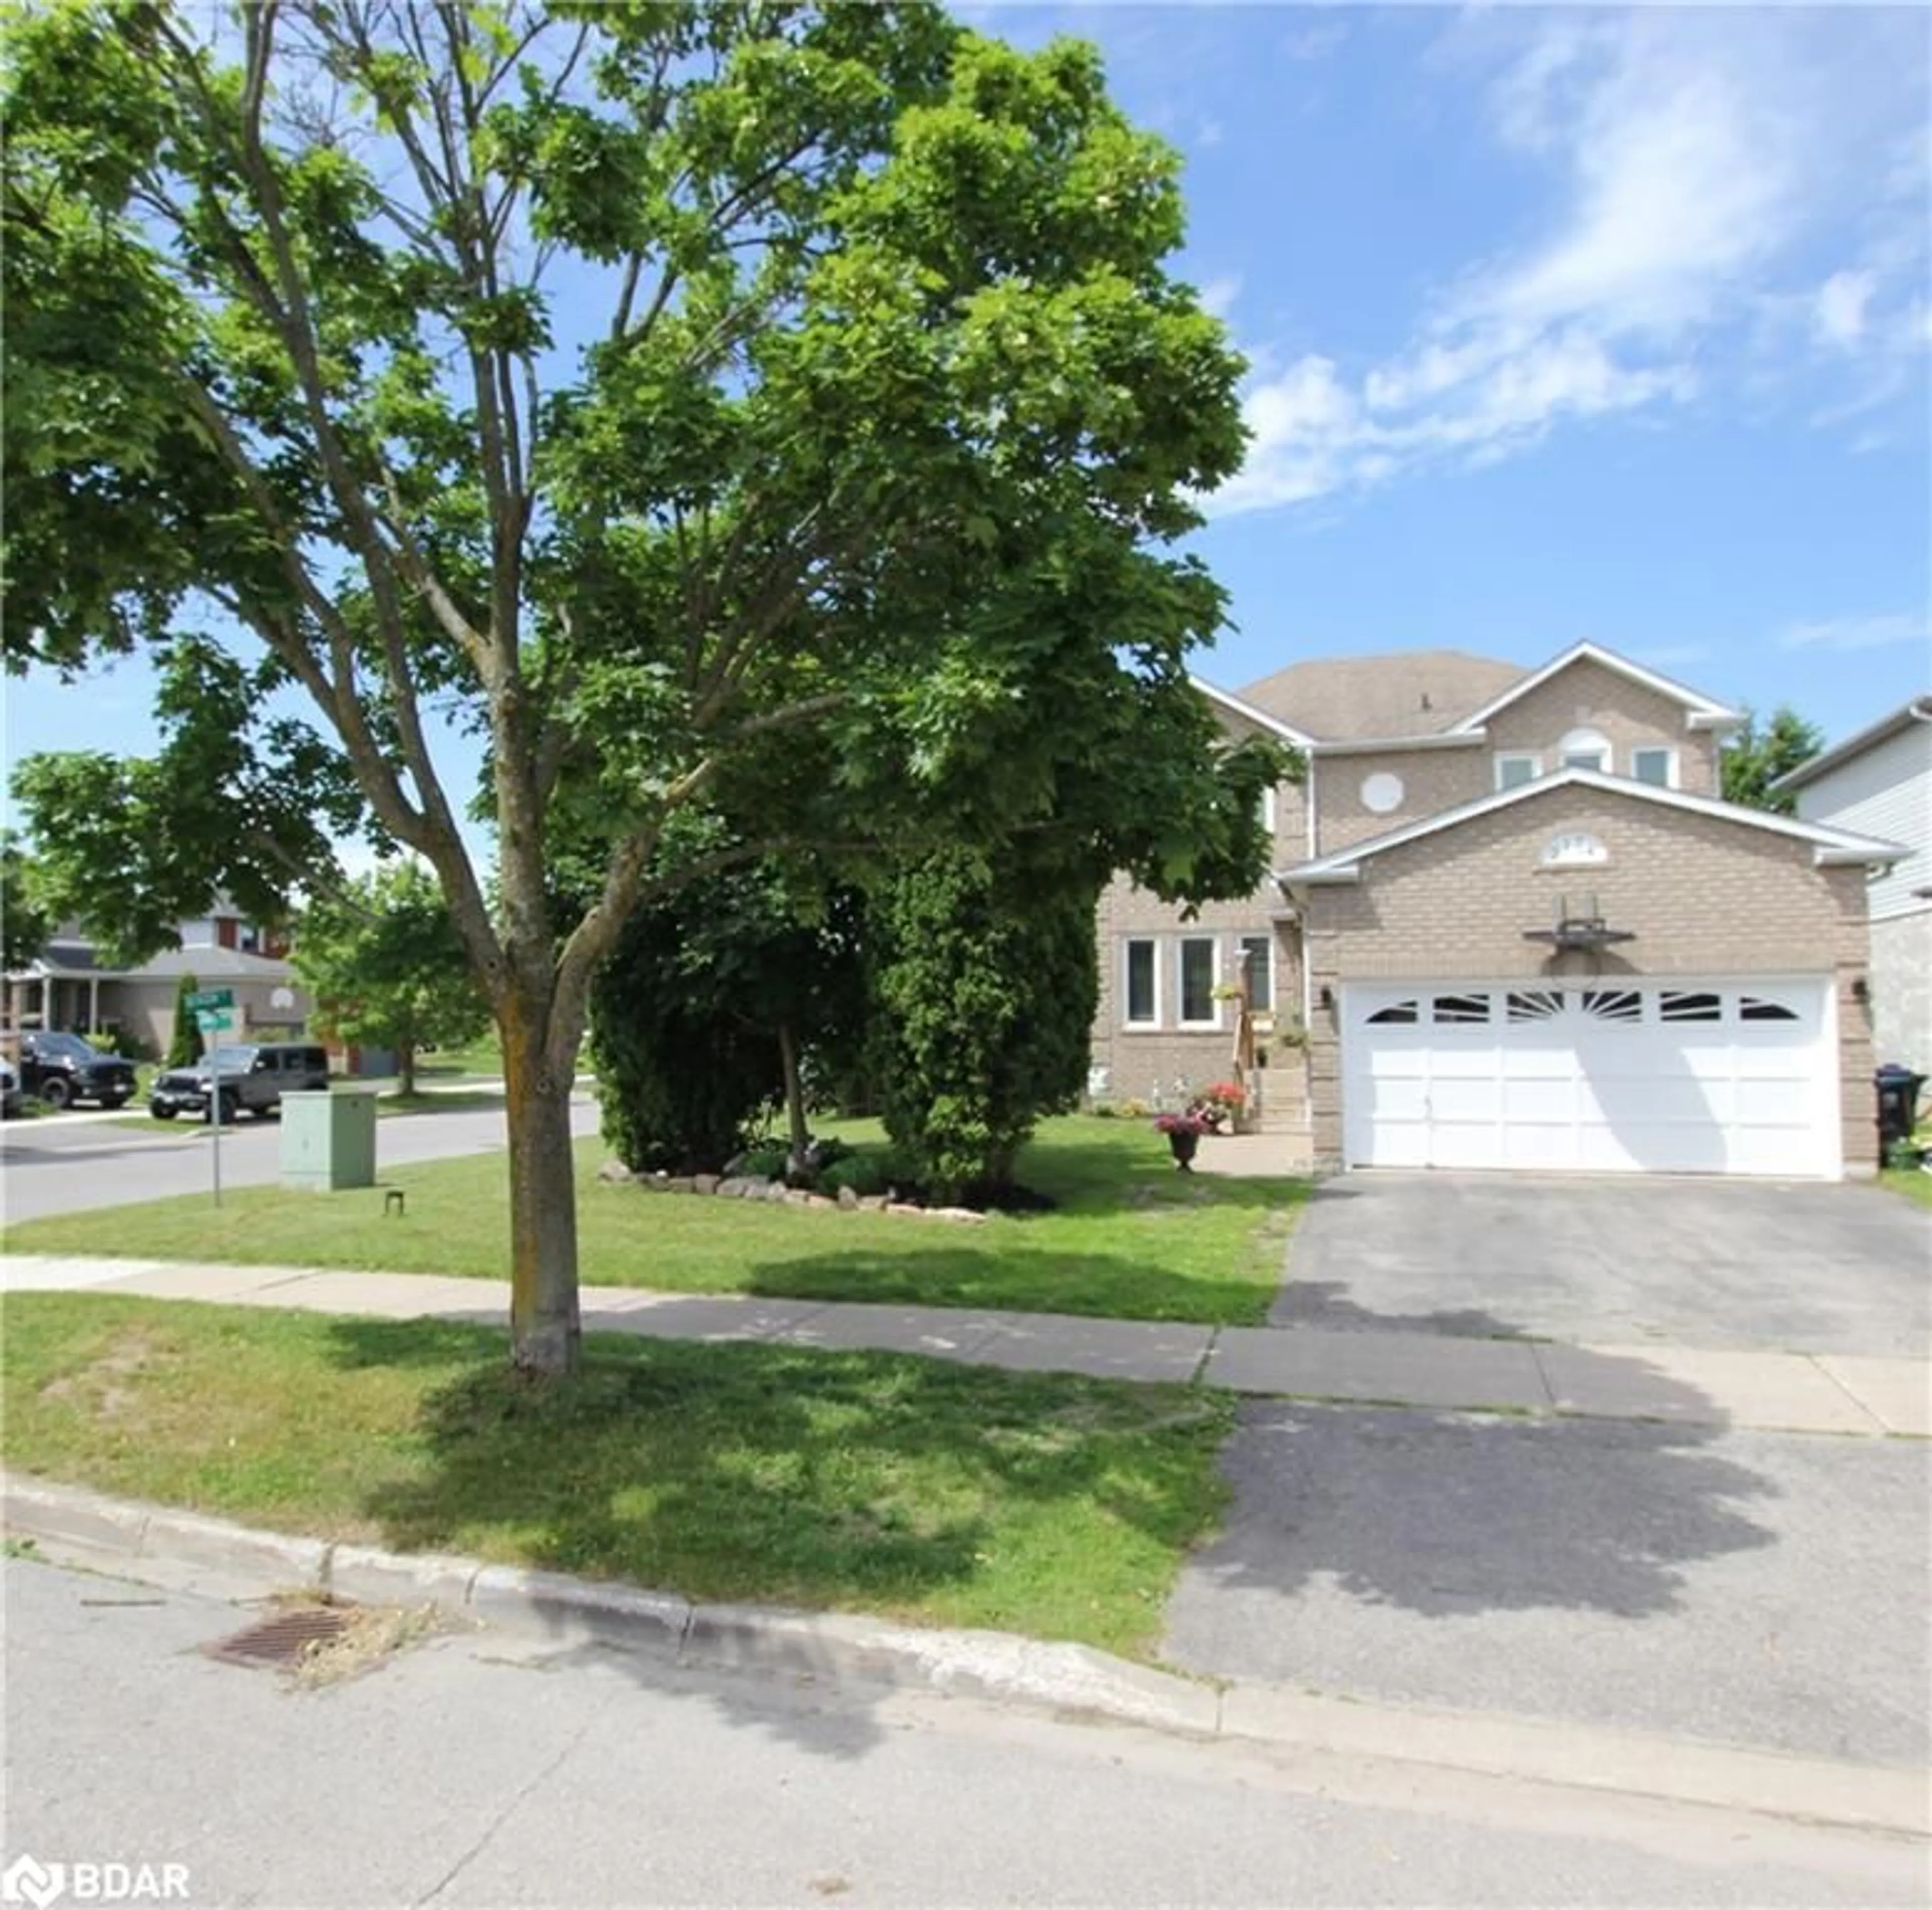 Frontside or backside of a home for 2174 Jans Blvd, Innisfil Ontario L9S 1Y4